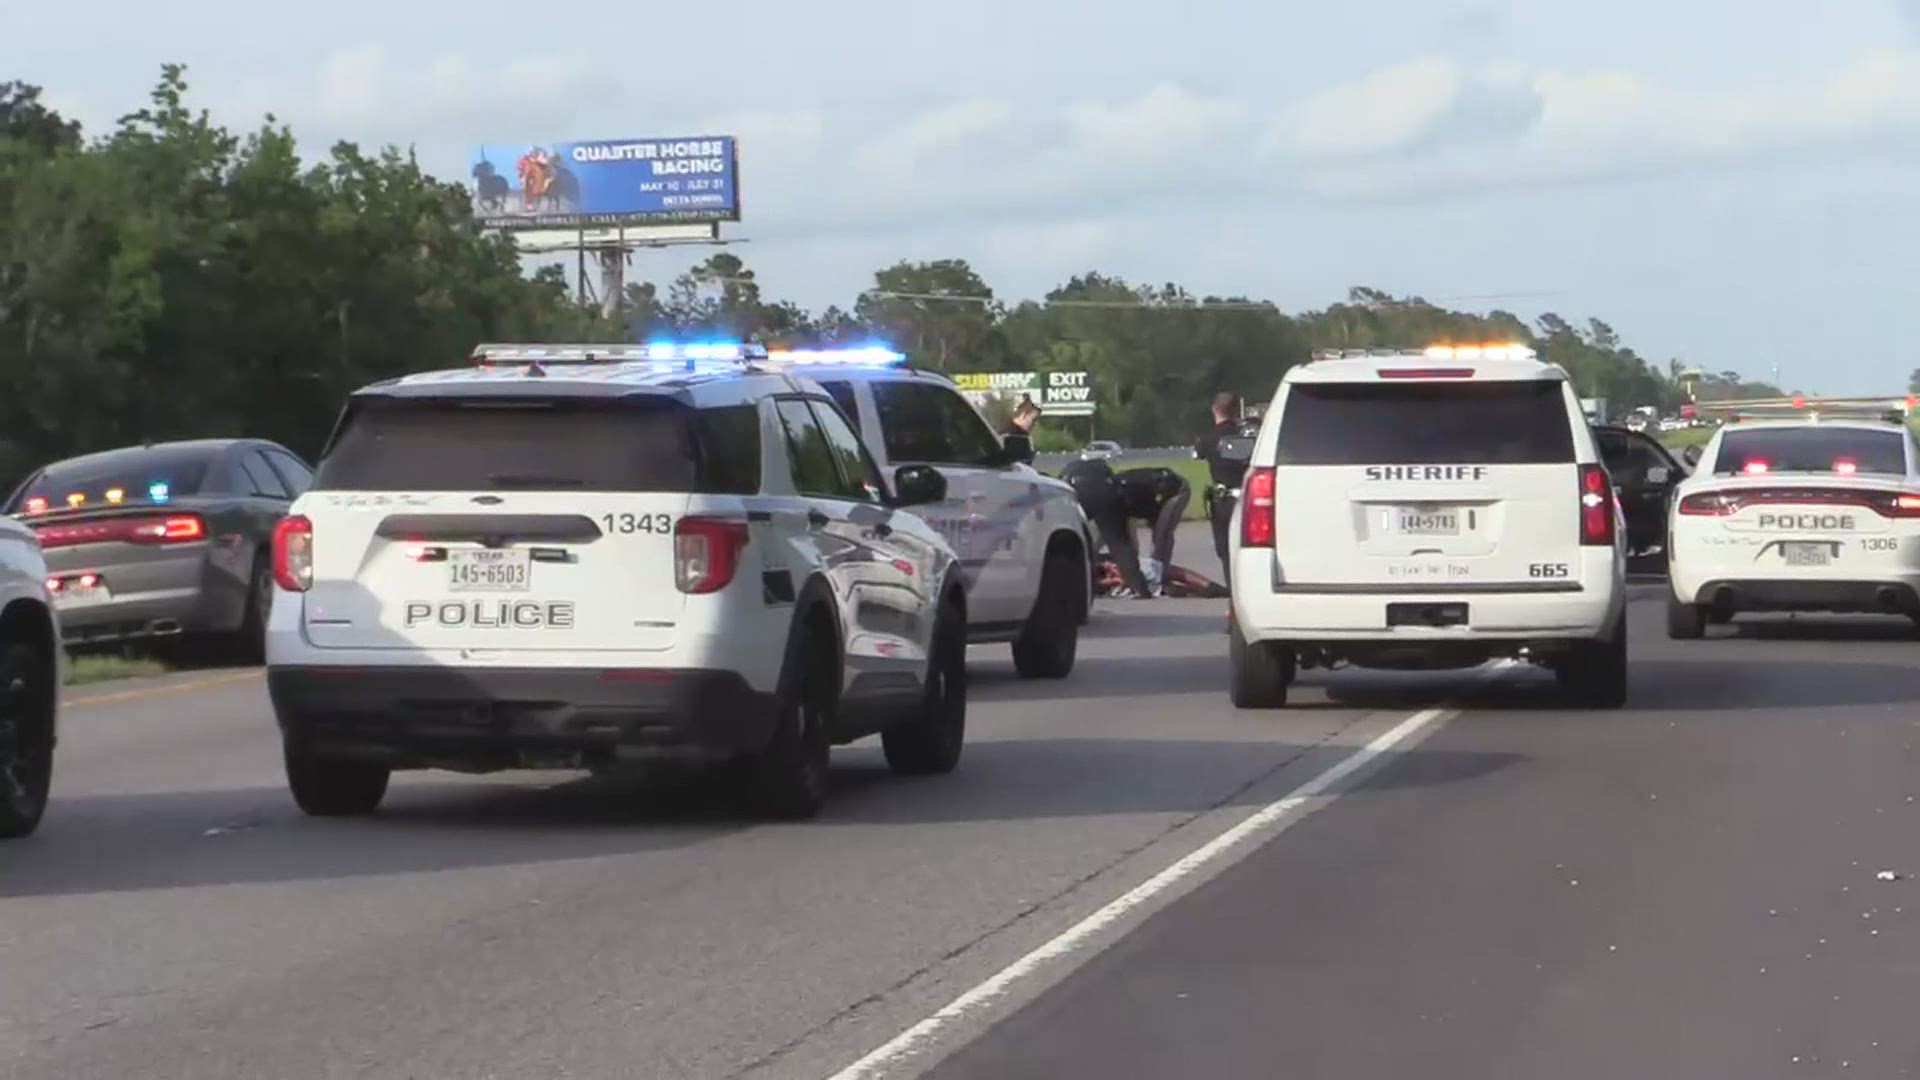 The chase began around 6 p.m. after an officer spotted a murder suspect on Interstate 10 in Chambers County.